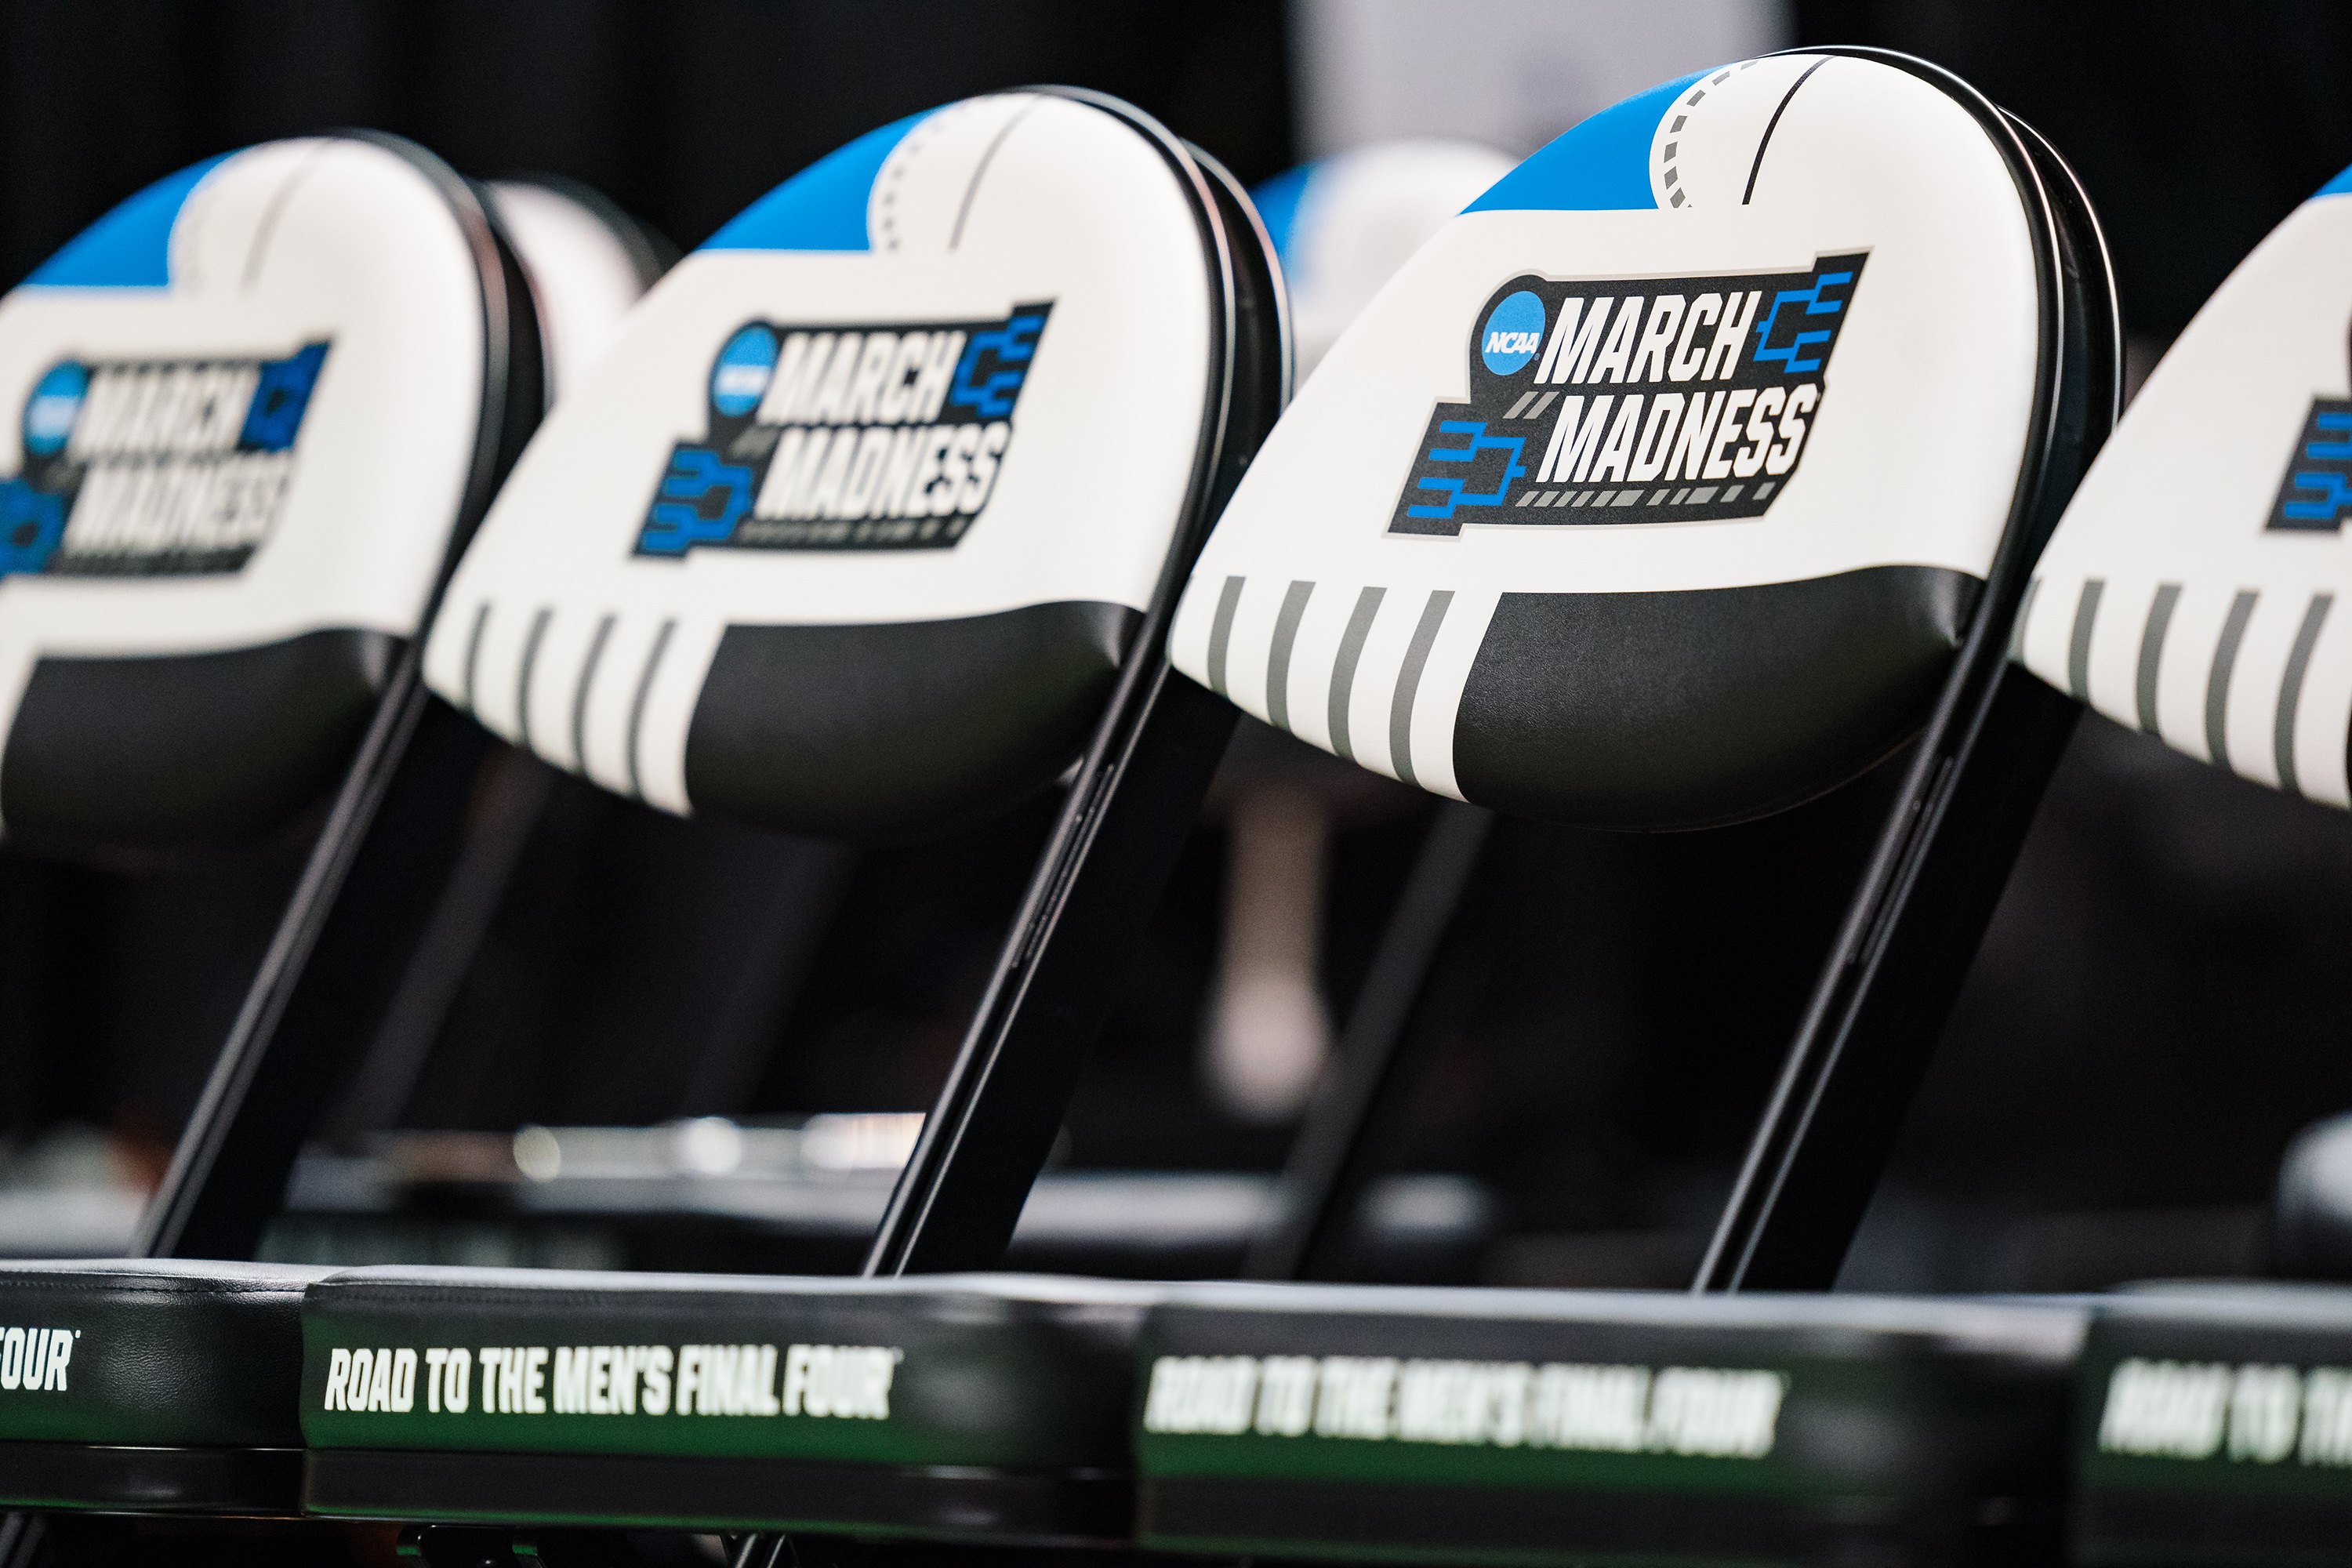 Every game of the men’s tournament will be aired on various streaming platforms, and fans in Hong Kong looking to tune in will need to gain access to one of those. Photo: TNS